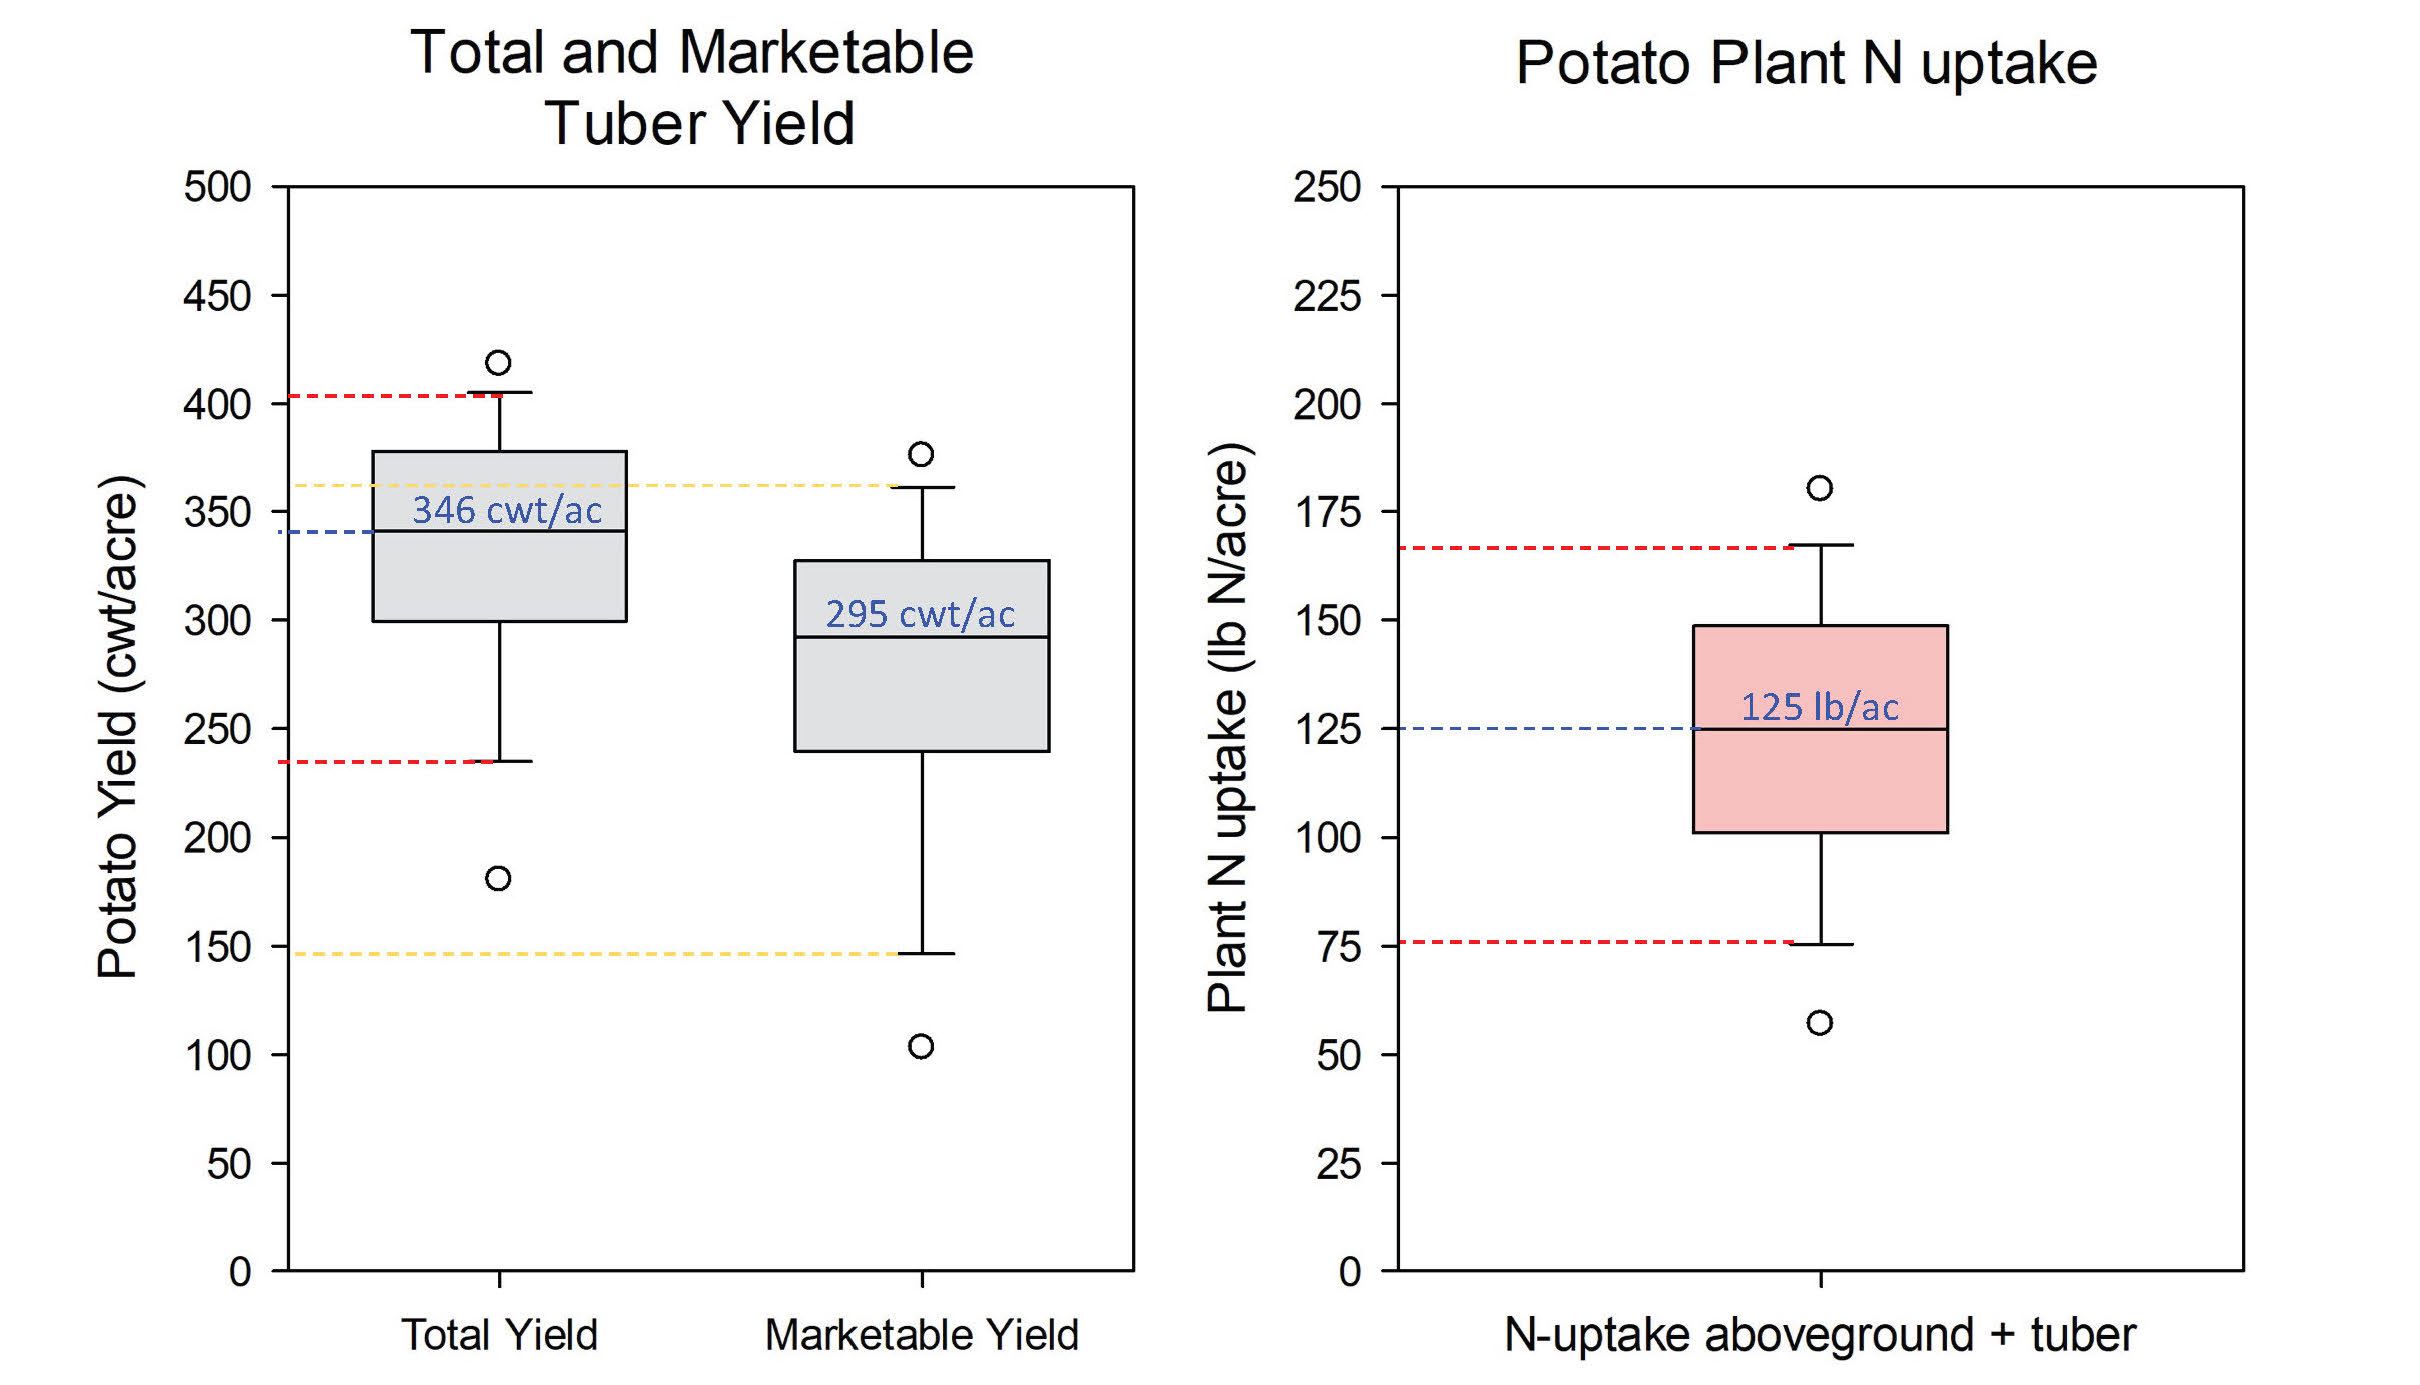 Box plot representation of total and marketable tuber yield (tuber size > 1⅞ inches) and respective potato plant N uptake (shoots and tubers) of cultivars Atlantic and FL1867 (total number of observations = 576) cultivated in six commercial fields of northeast Florida between 2010 and 2014. Box plot interpretation, upper and lower circles represent the outlier measured values. Lower and upper whiskers represent the 5th and 95th percentile of the measured values, respectively; thus, the interval between whiskers represents 90% of the observations. The box's lower and upper limits represent the 25th and 75th percentile of the measured values, and the box centerline represents the median value (separating the higher half from the lower half). 